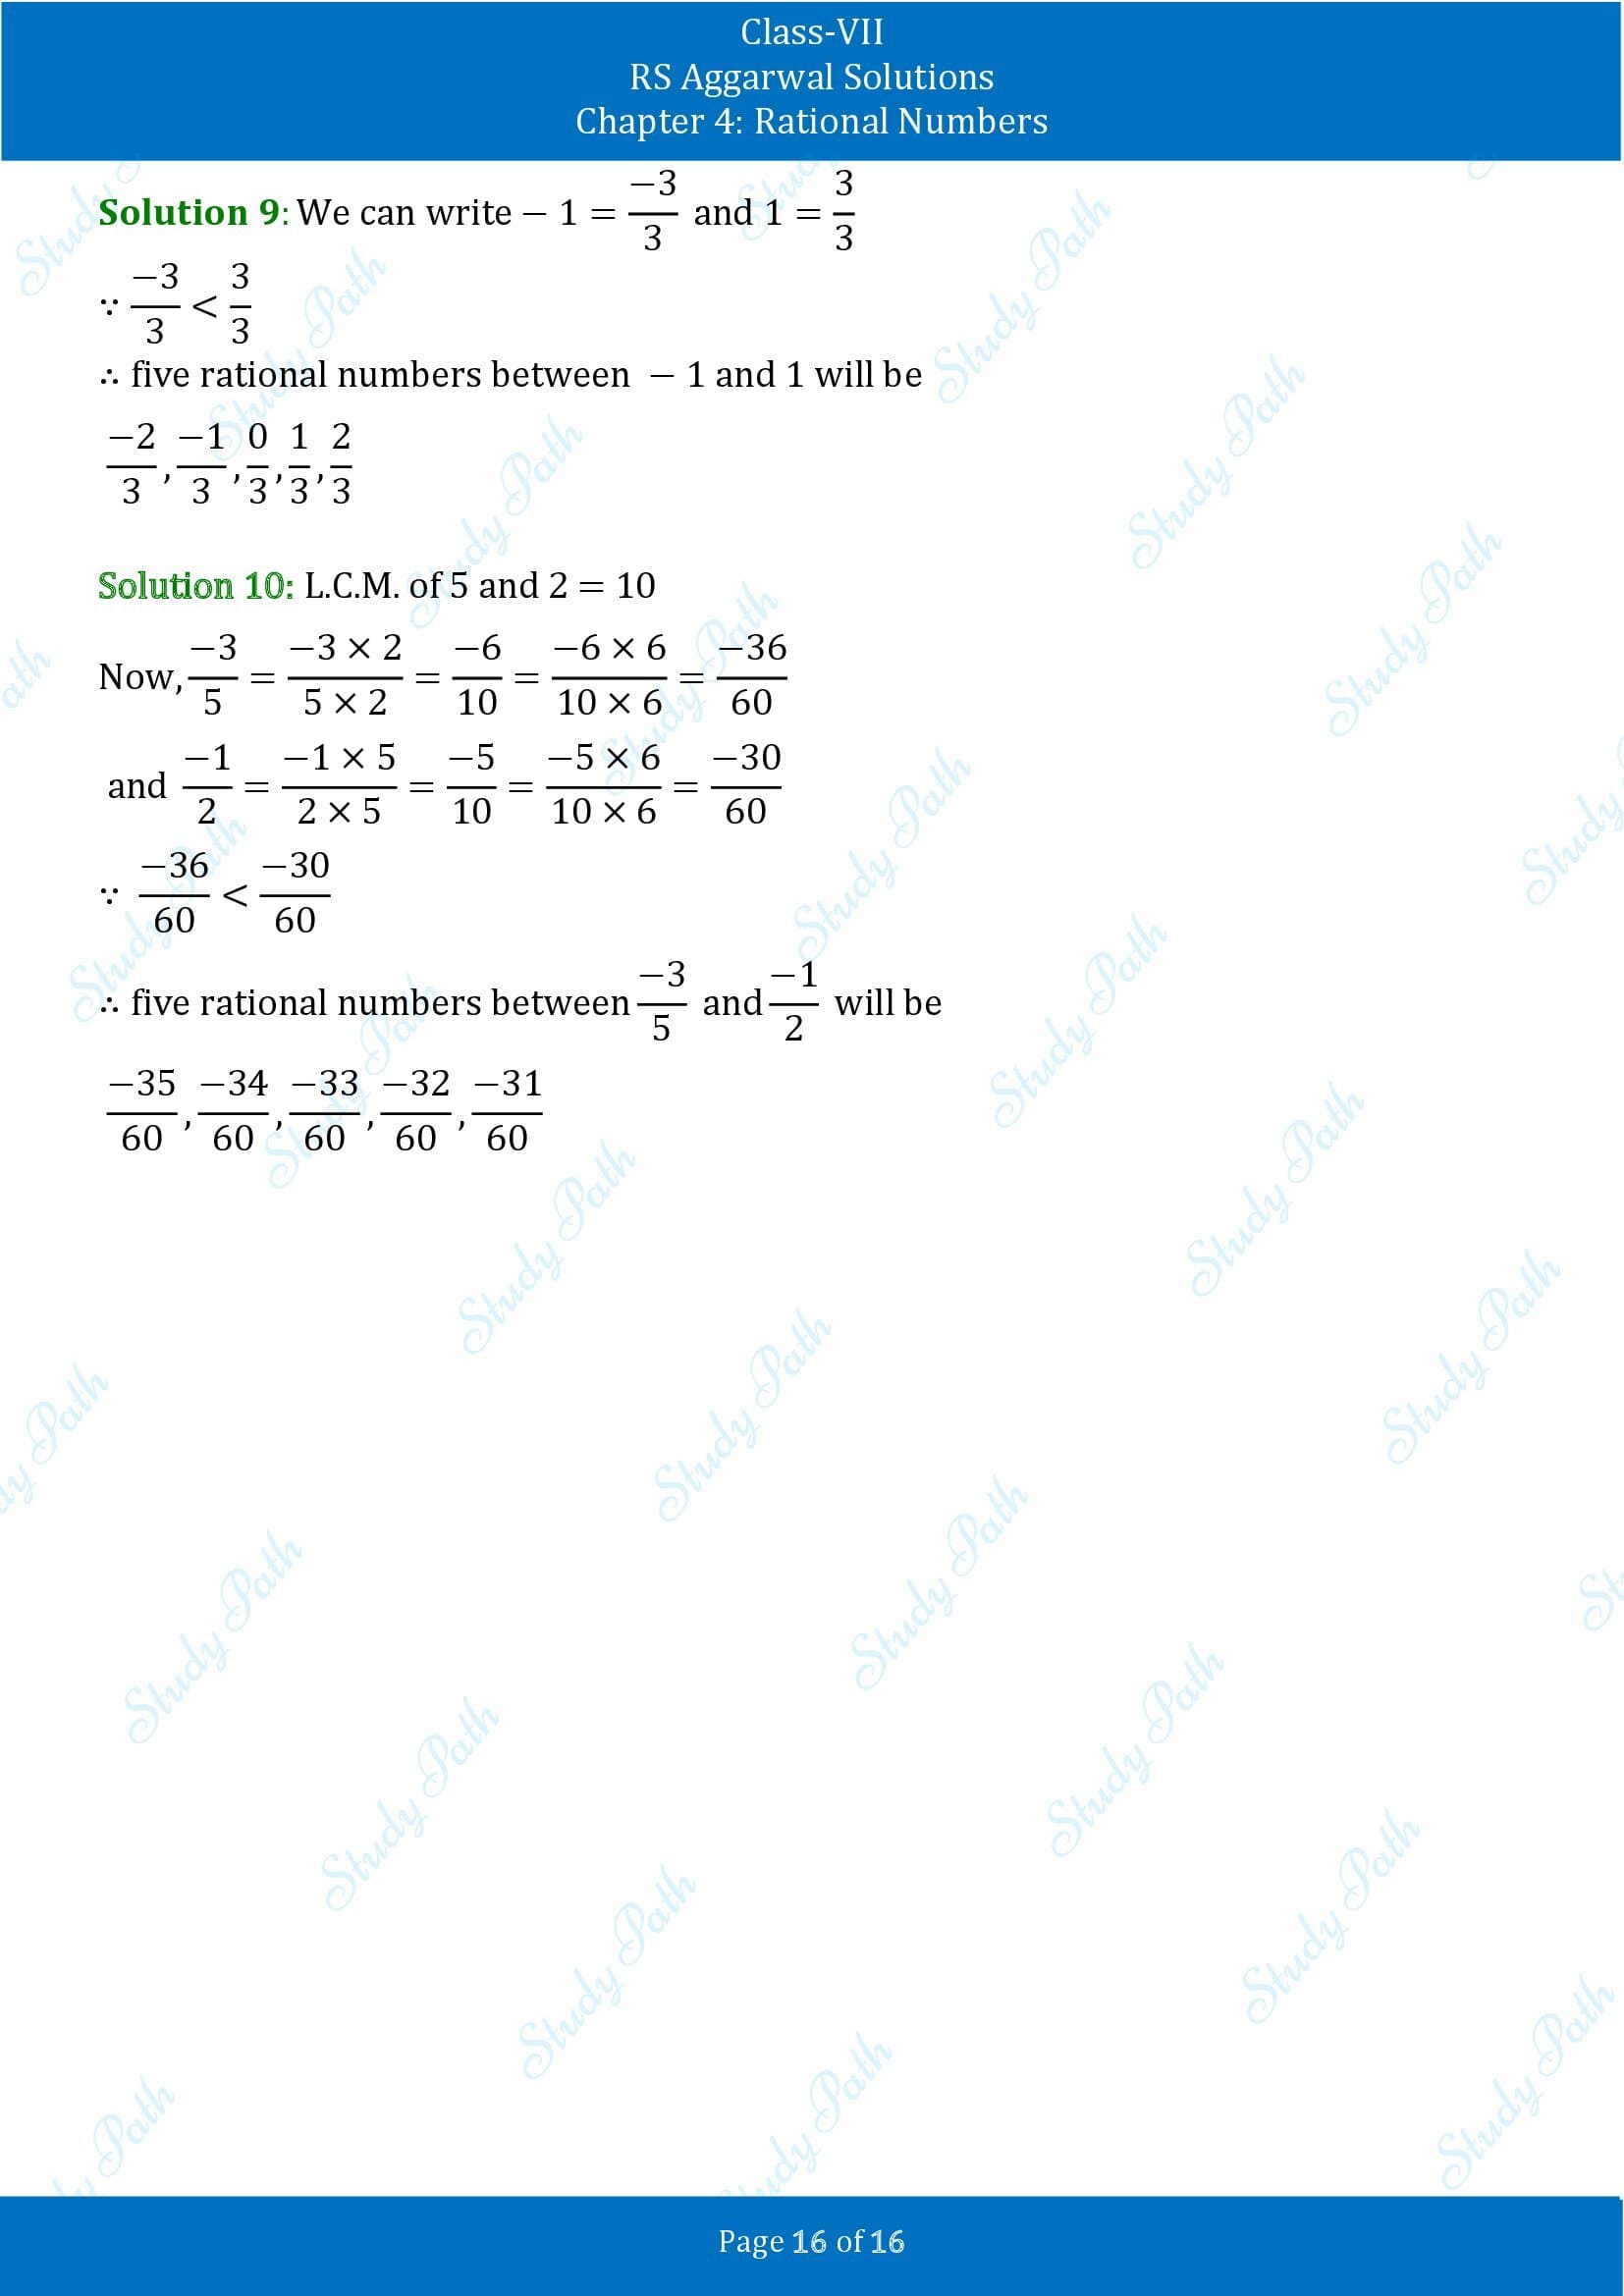 RS Aggarwal Solutions Class 7 Chapter 4 Rational Numbers Exercise 4B 00016